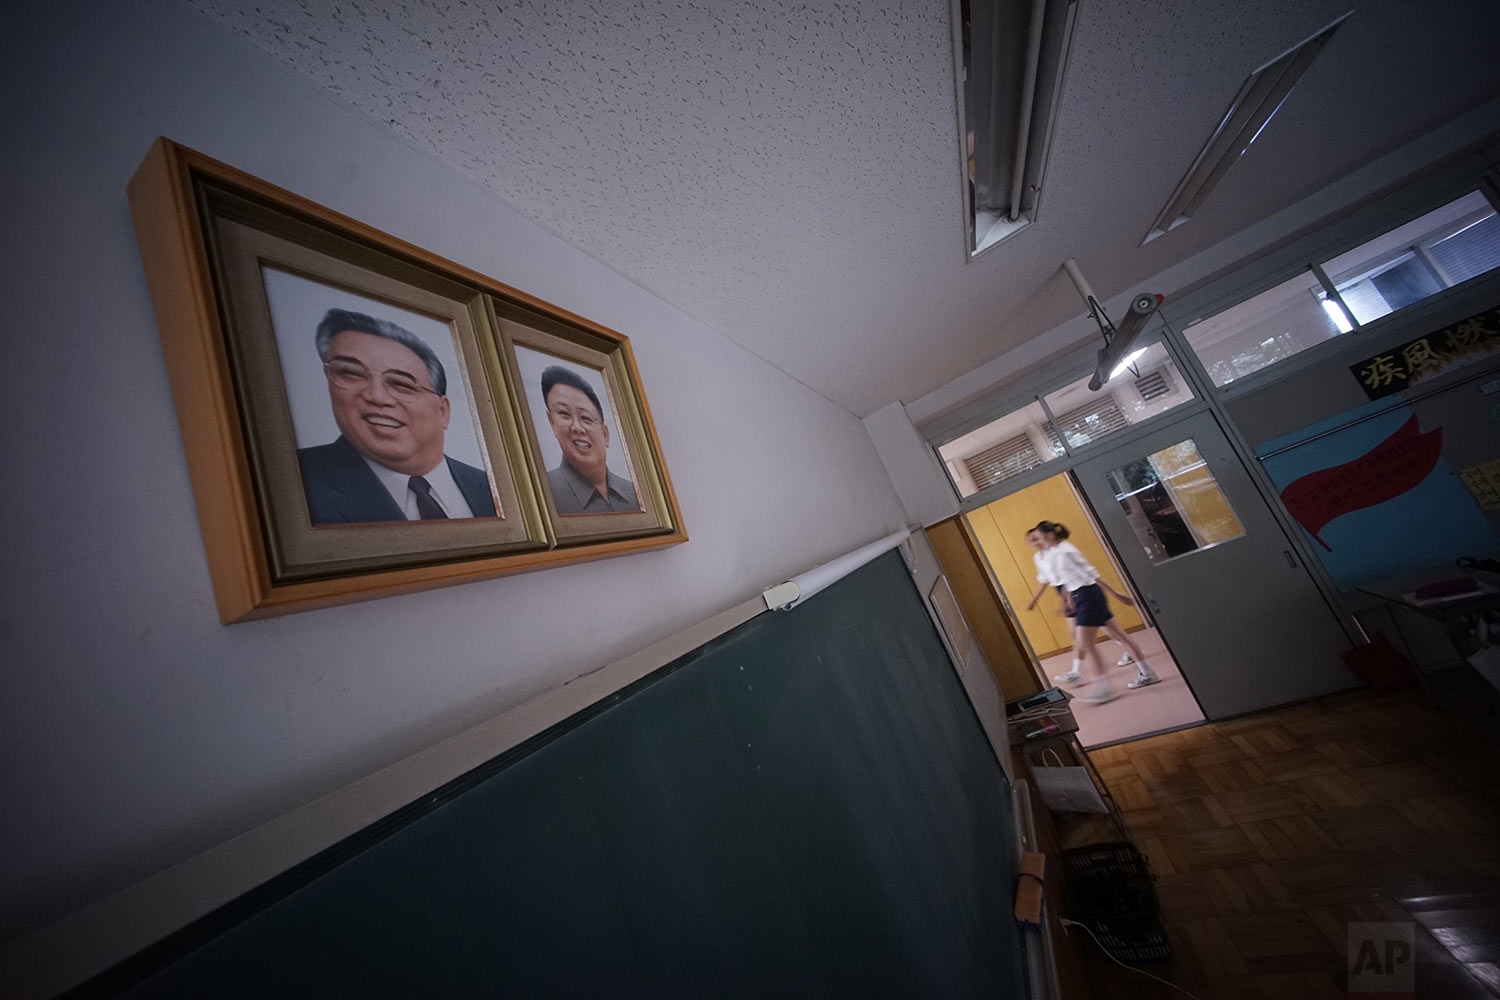  In this Sept. 26, 2017, photo, students walk by a classroom where the portraits of the late North Korean leaders Kim Il Sung and Kim Jong Il hang on the wall at a Tokyo Korean junior and senior high school in Tokyo.  (AP Photo/Eugene Hoshiko) 